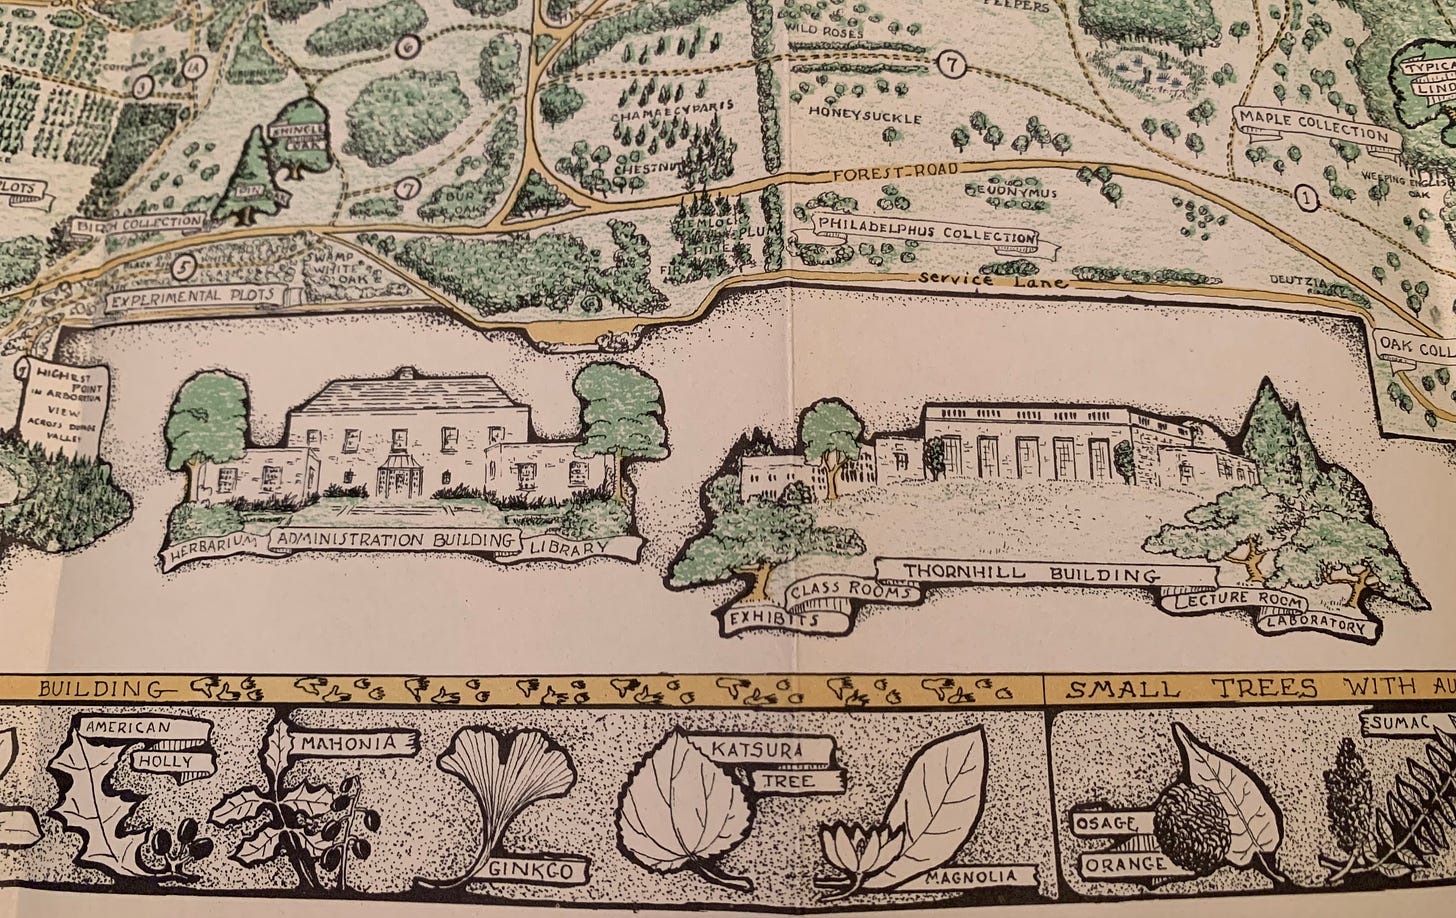 Inset of May Watts' illustrated map showing drawings of the Administration Building and Thornhill Building.